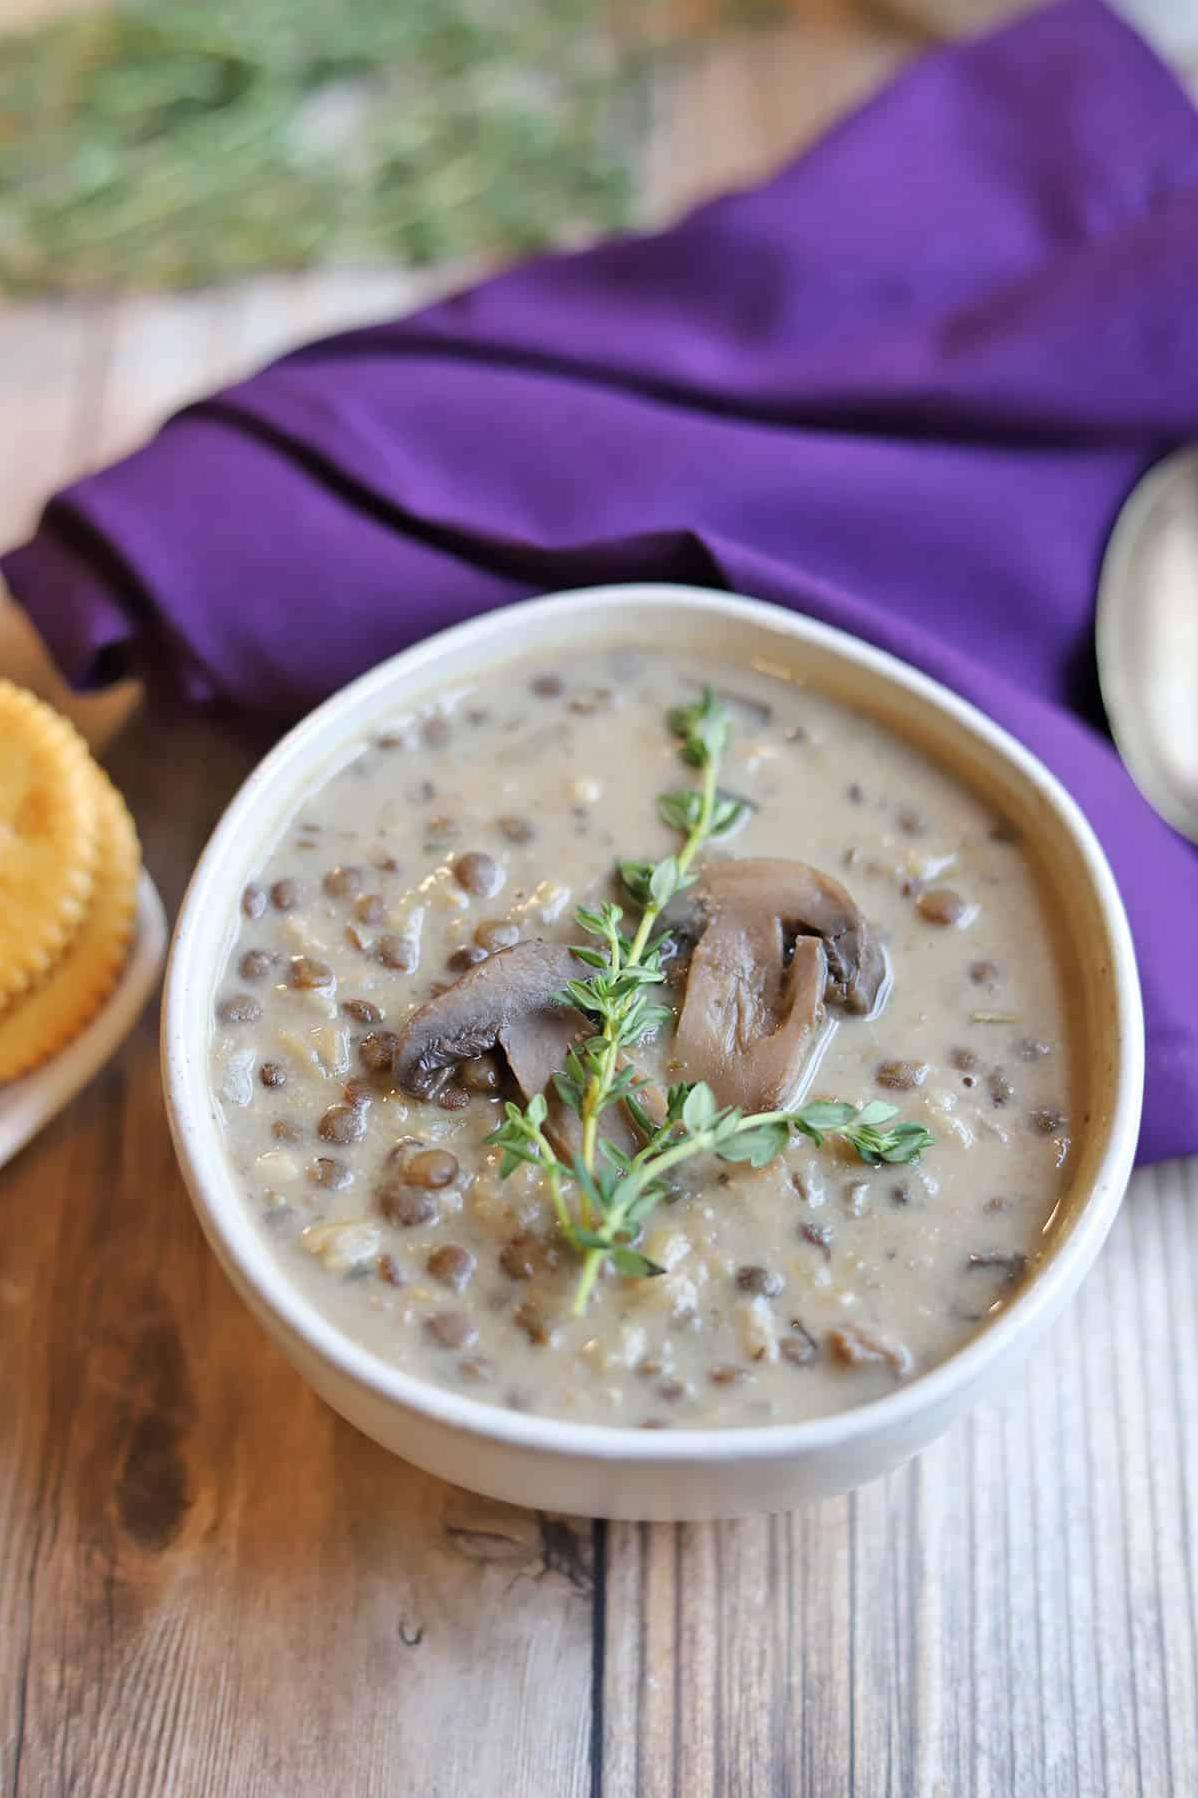  Lentils are a staple in many vegetarian diets, and this soup recipe is a great way to use them.